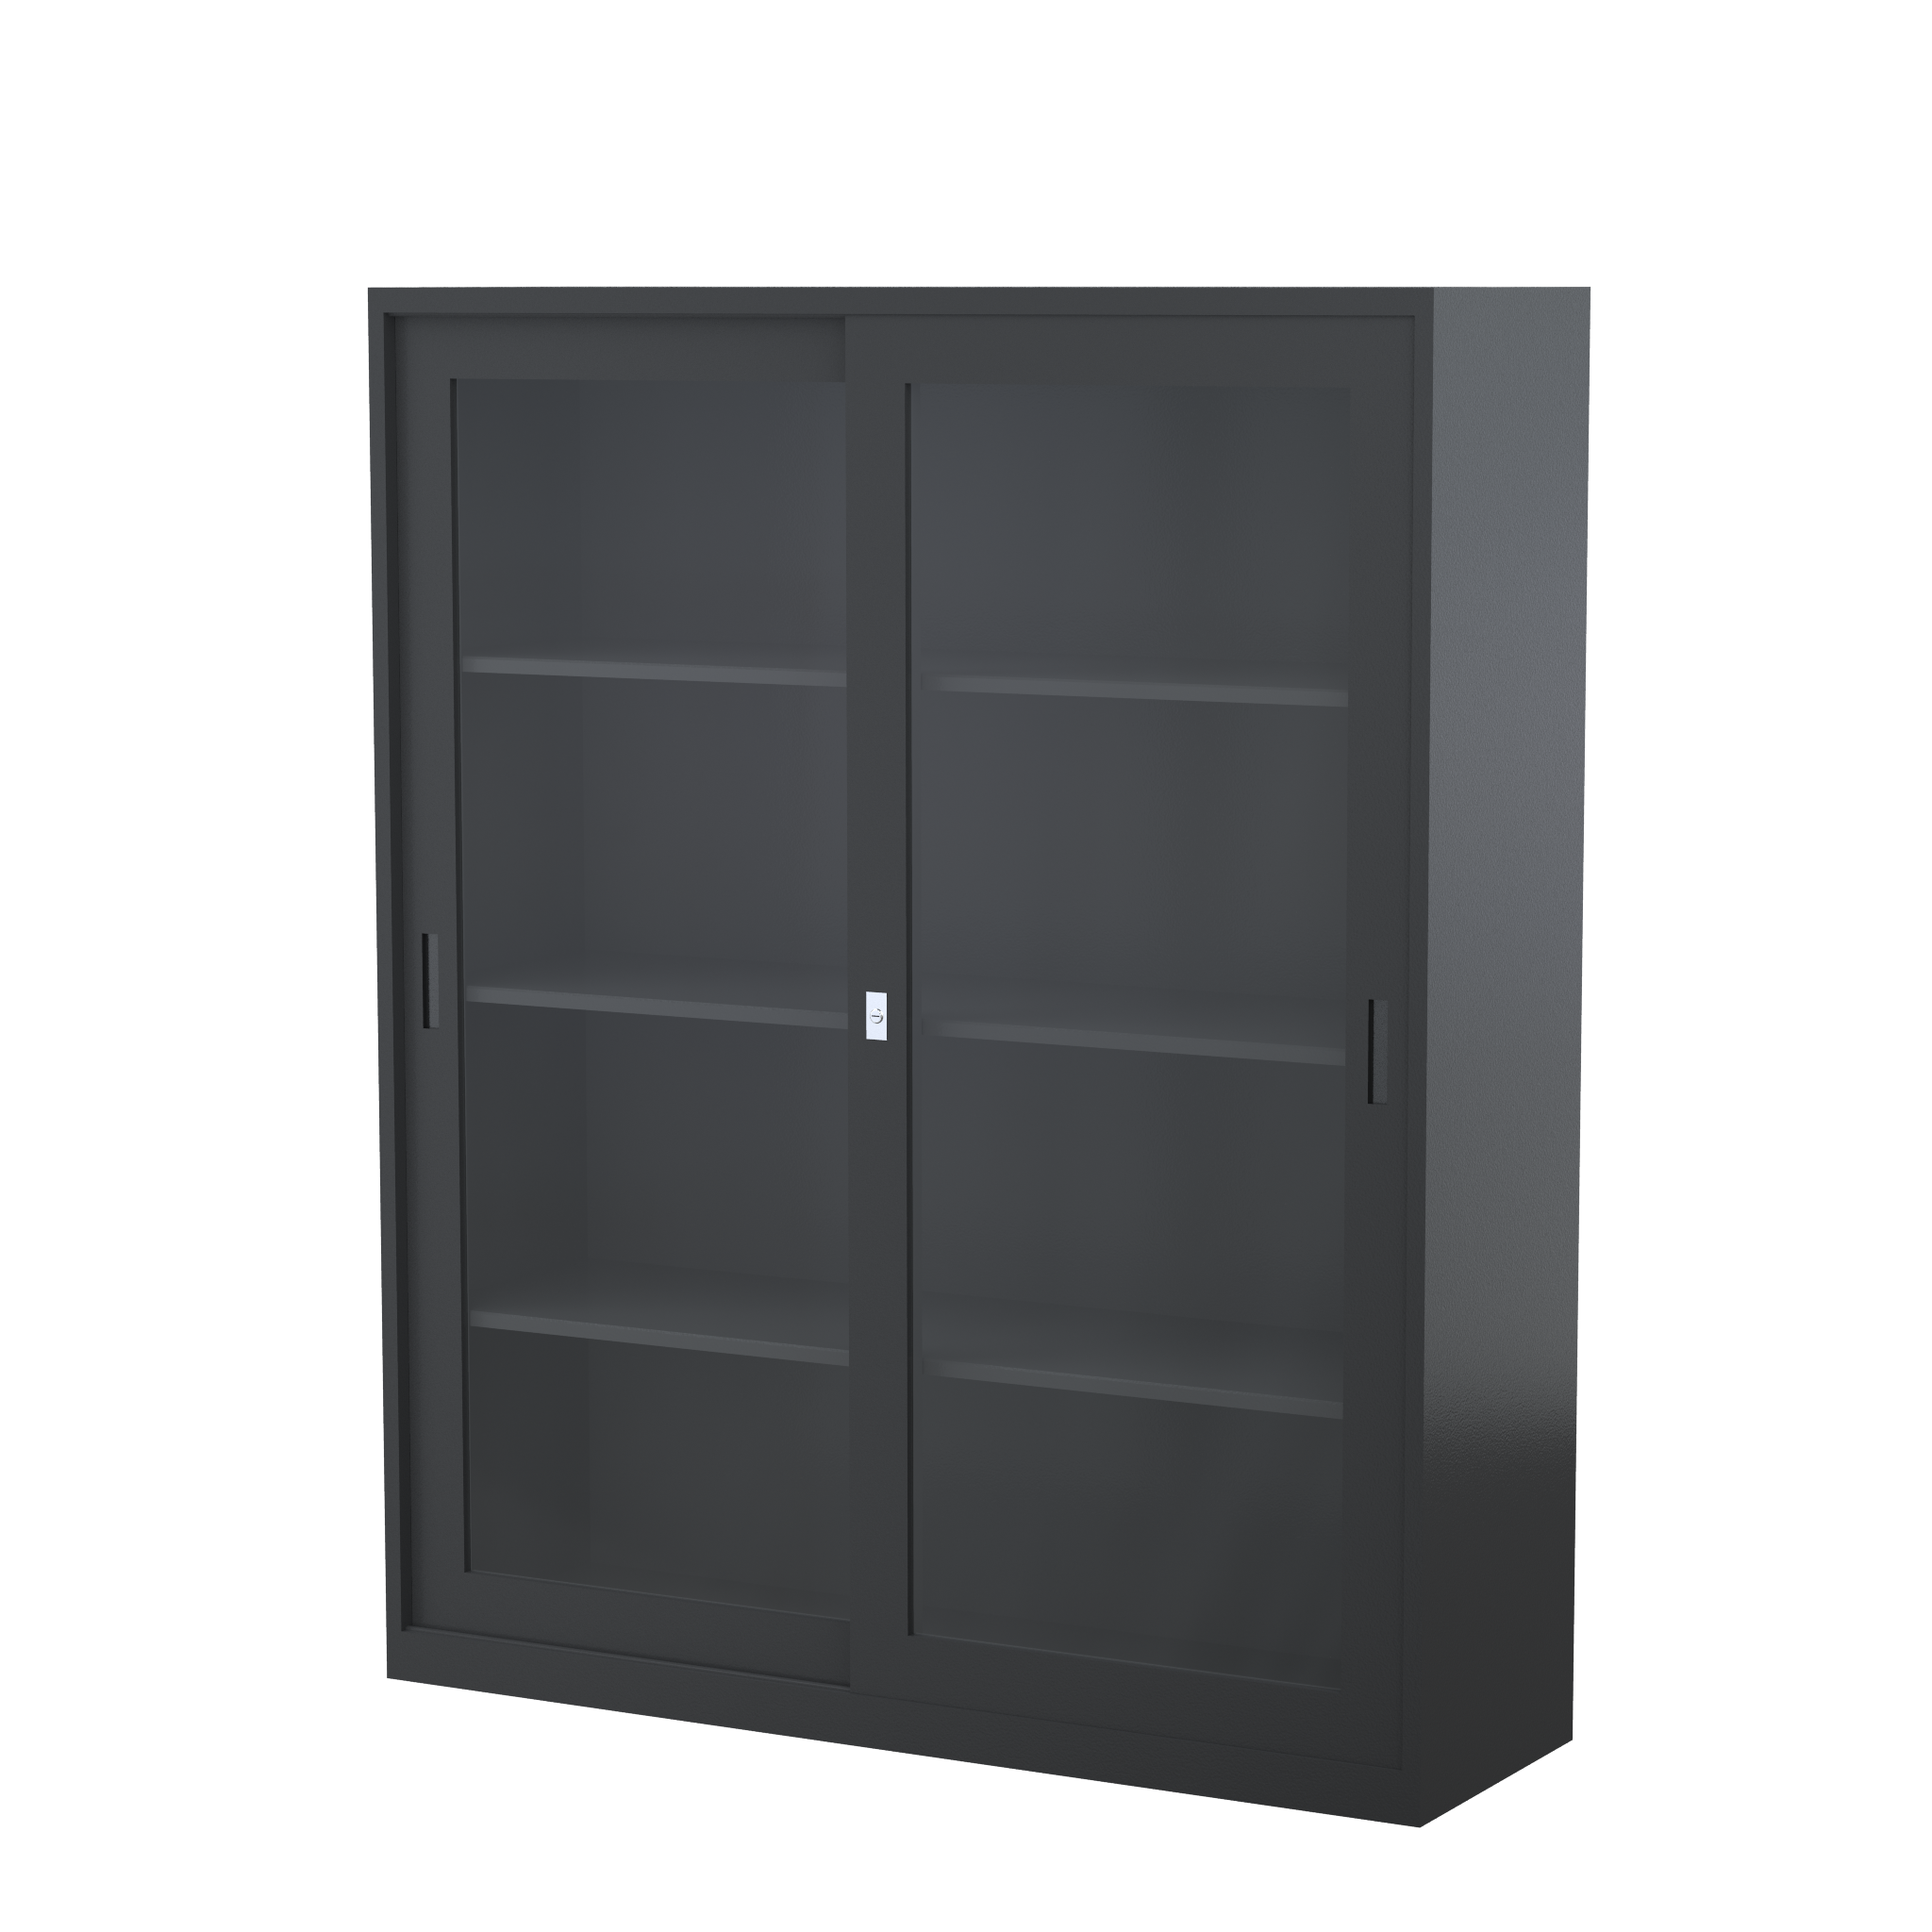 GD1830_1500 - STEELCO SG Cabinet 1830H x 1500W x 465D - 3 Shelves-GR.png